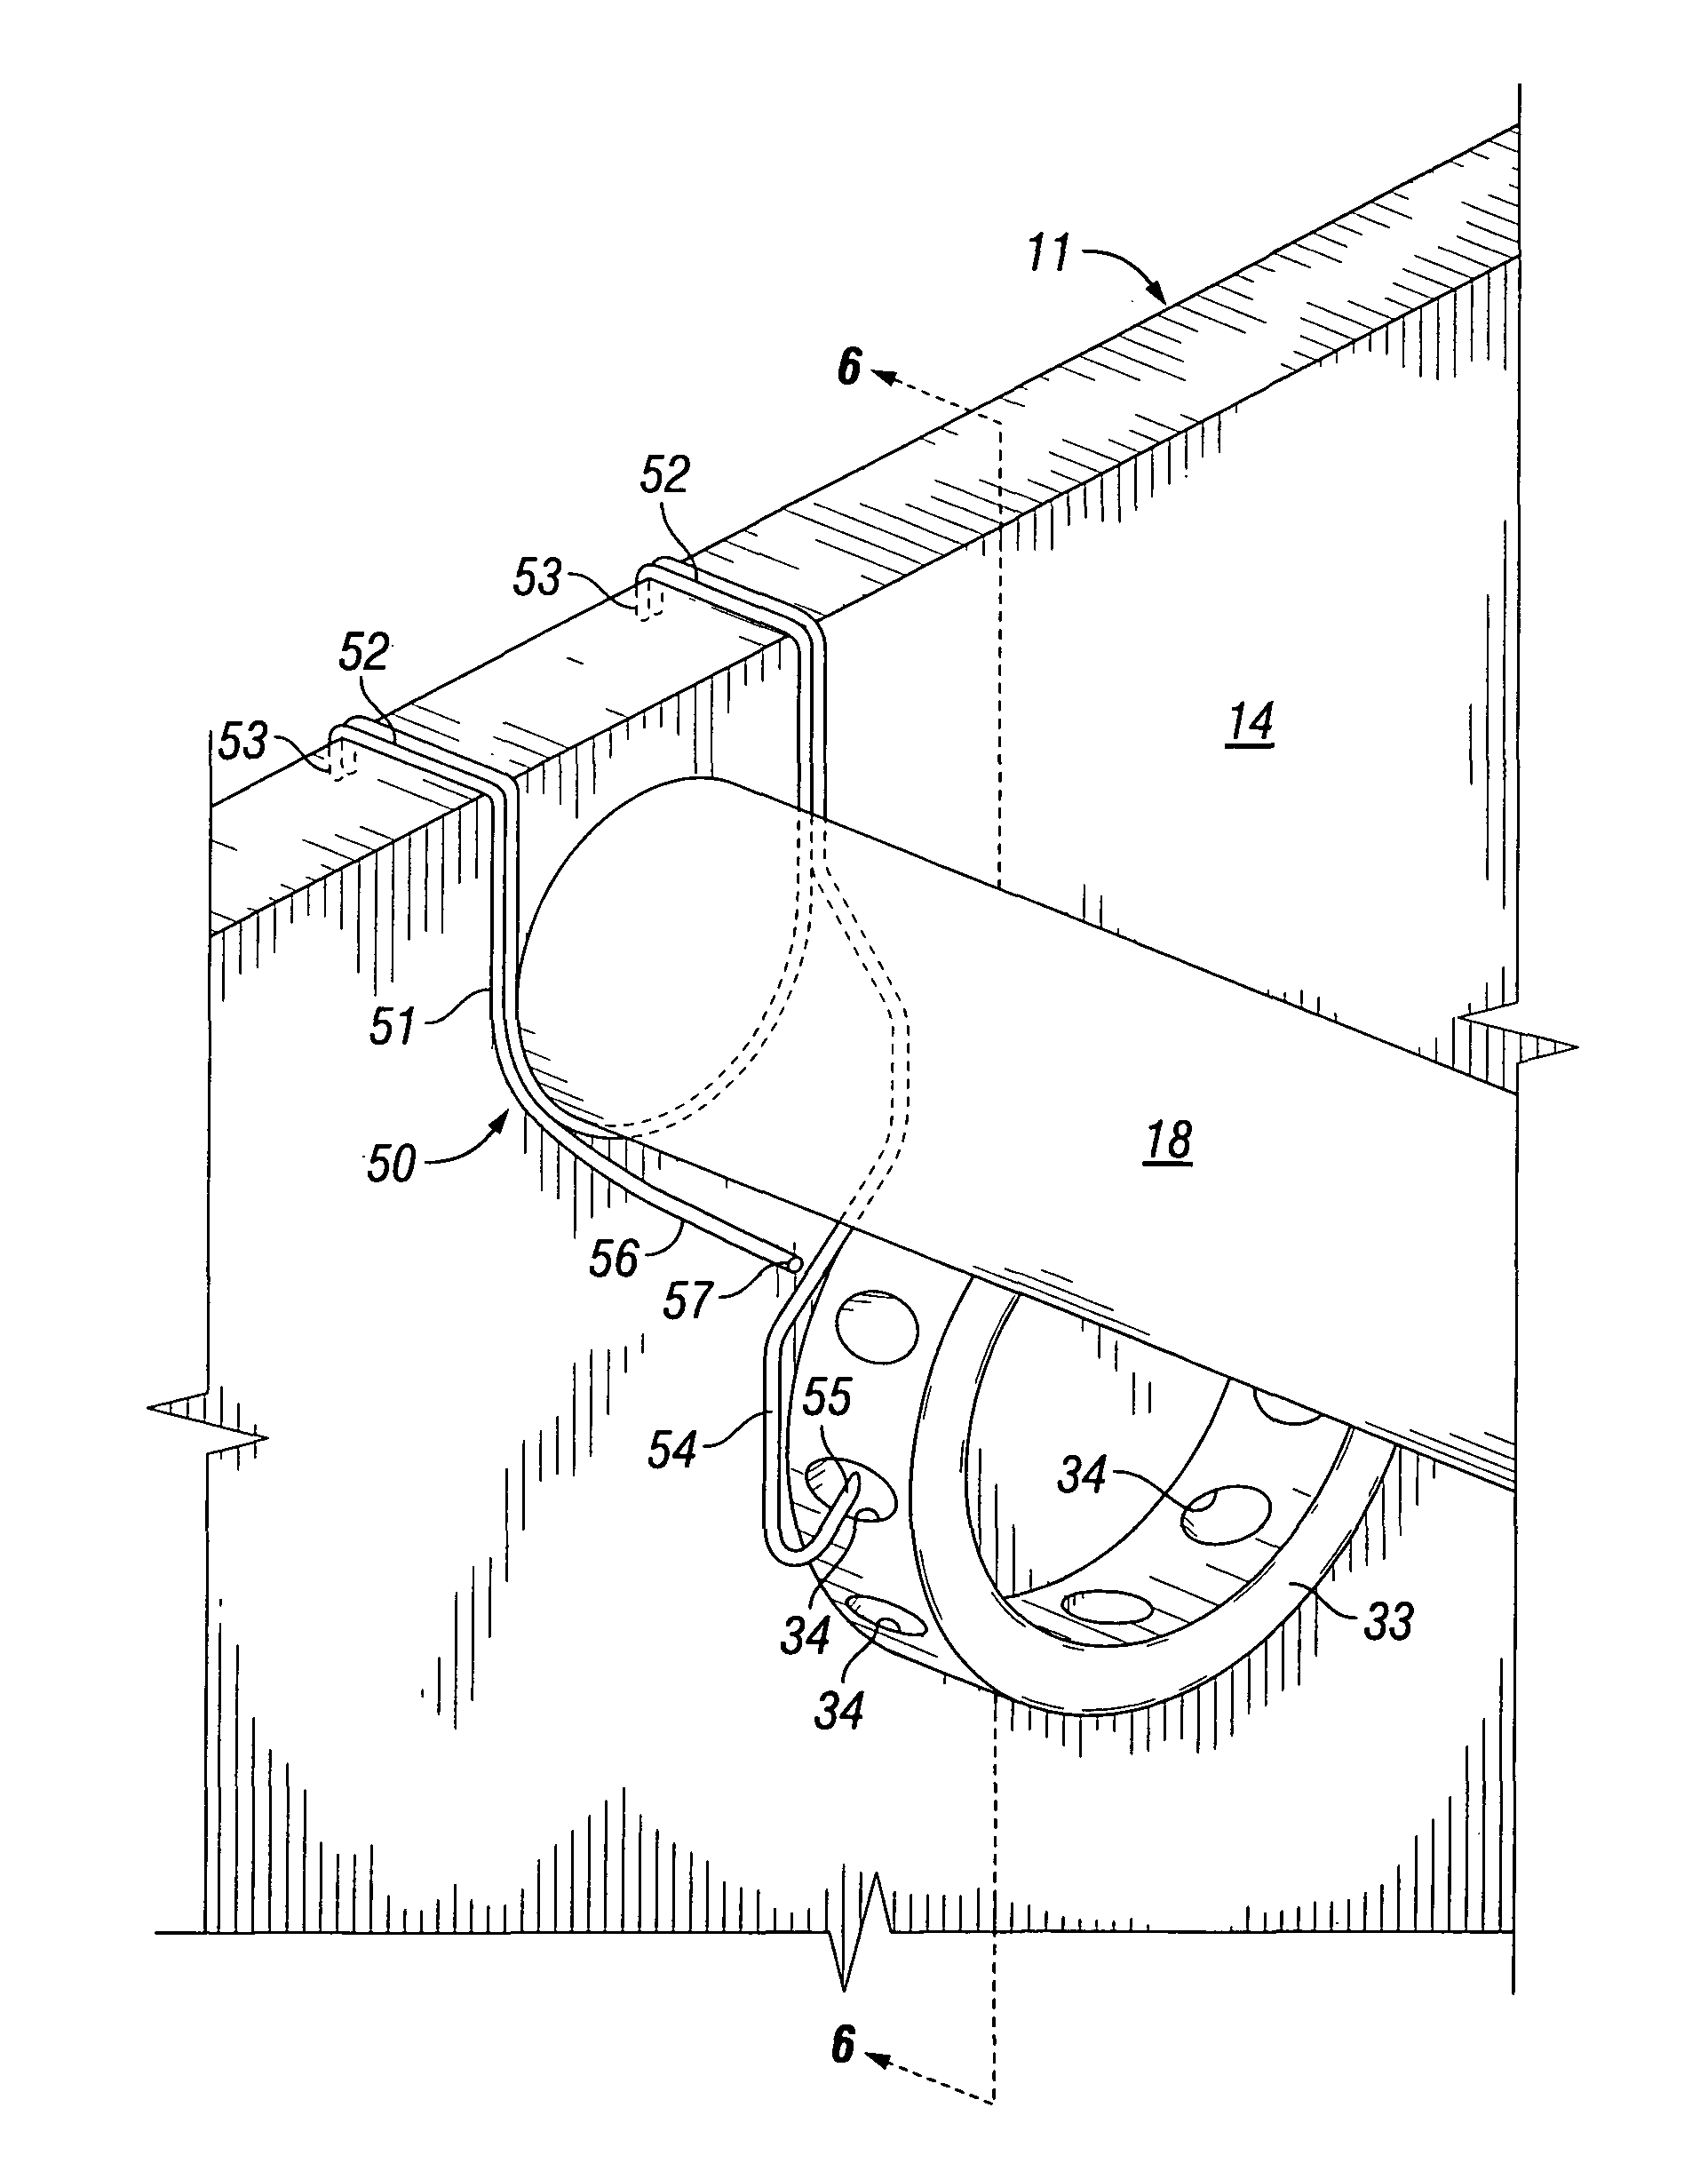 Retaining mechanisms for threaded bodies in reciprocating pumps